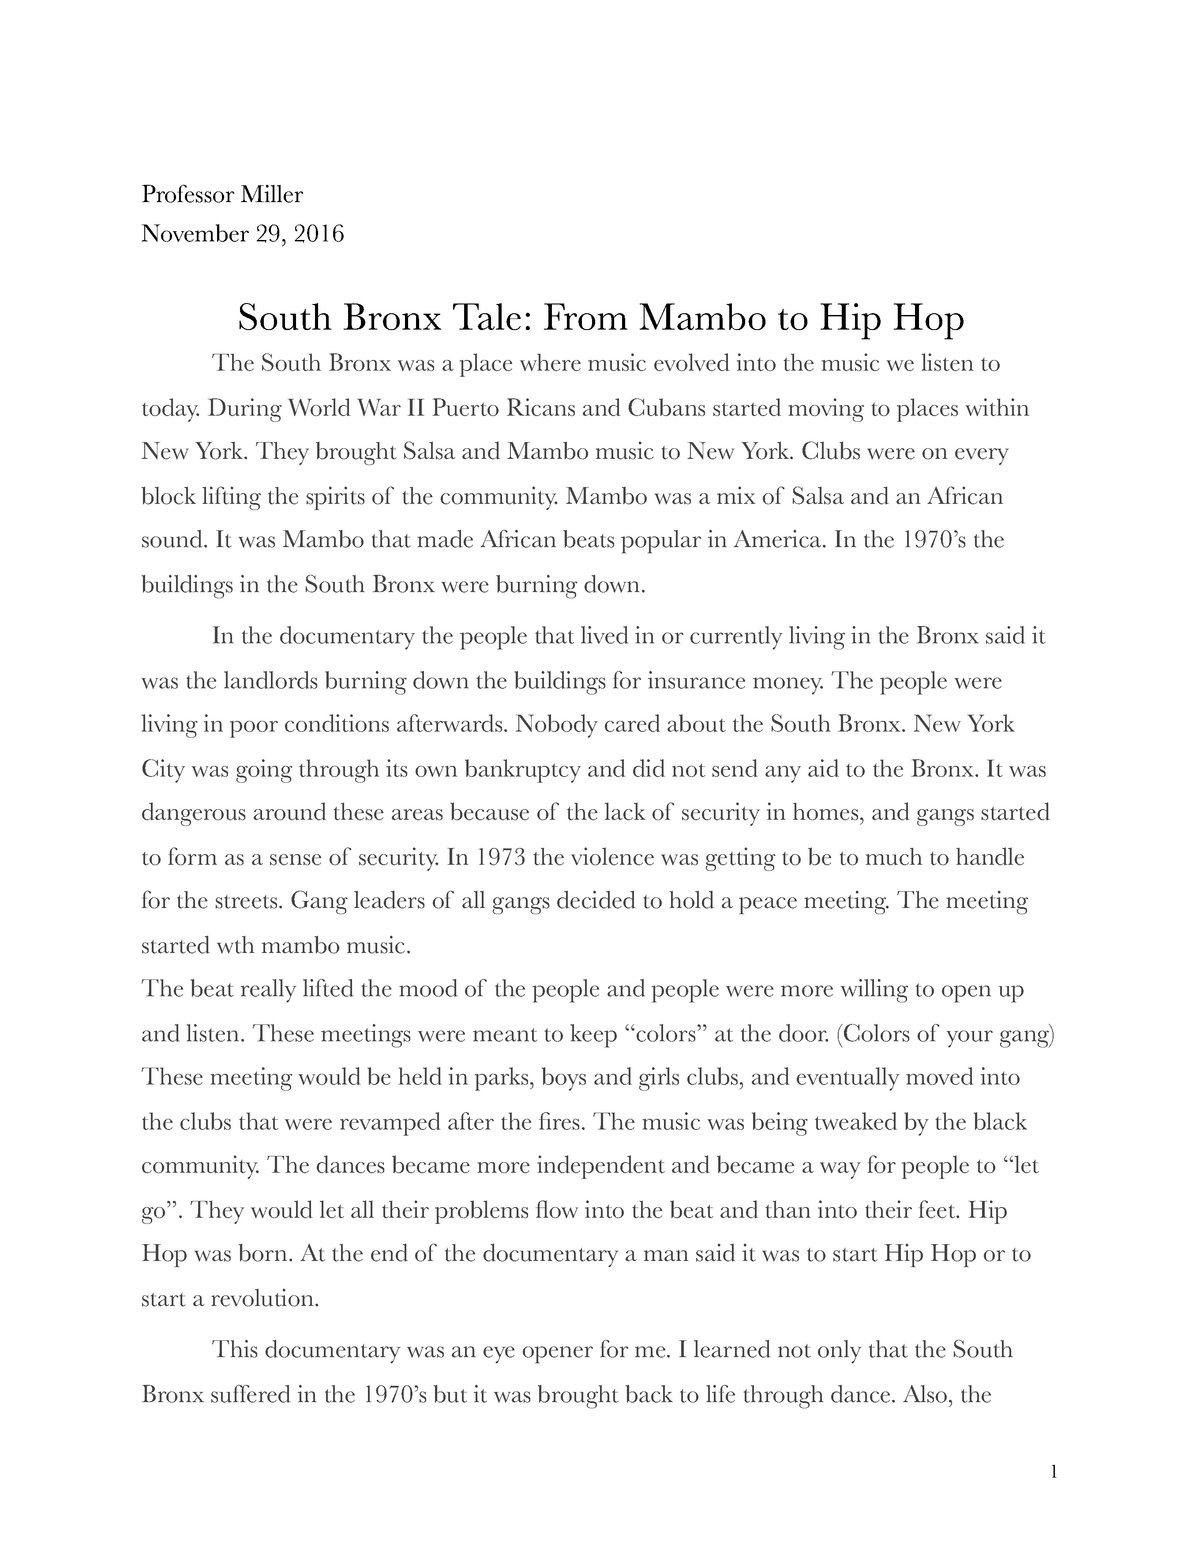 from mambo to hip hop essay